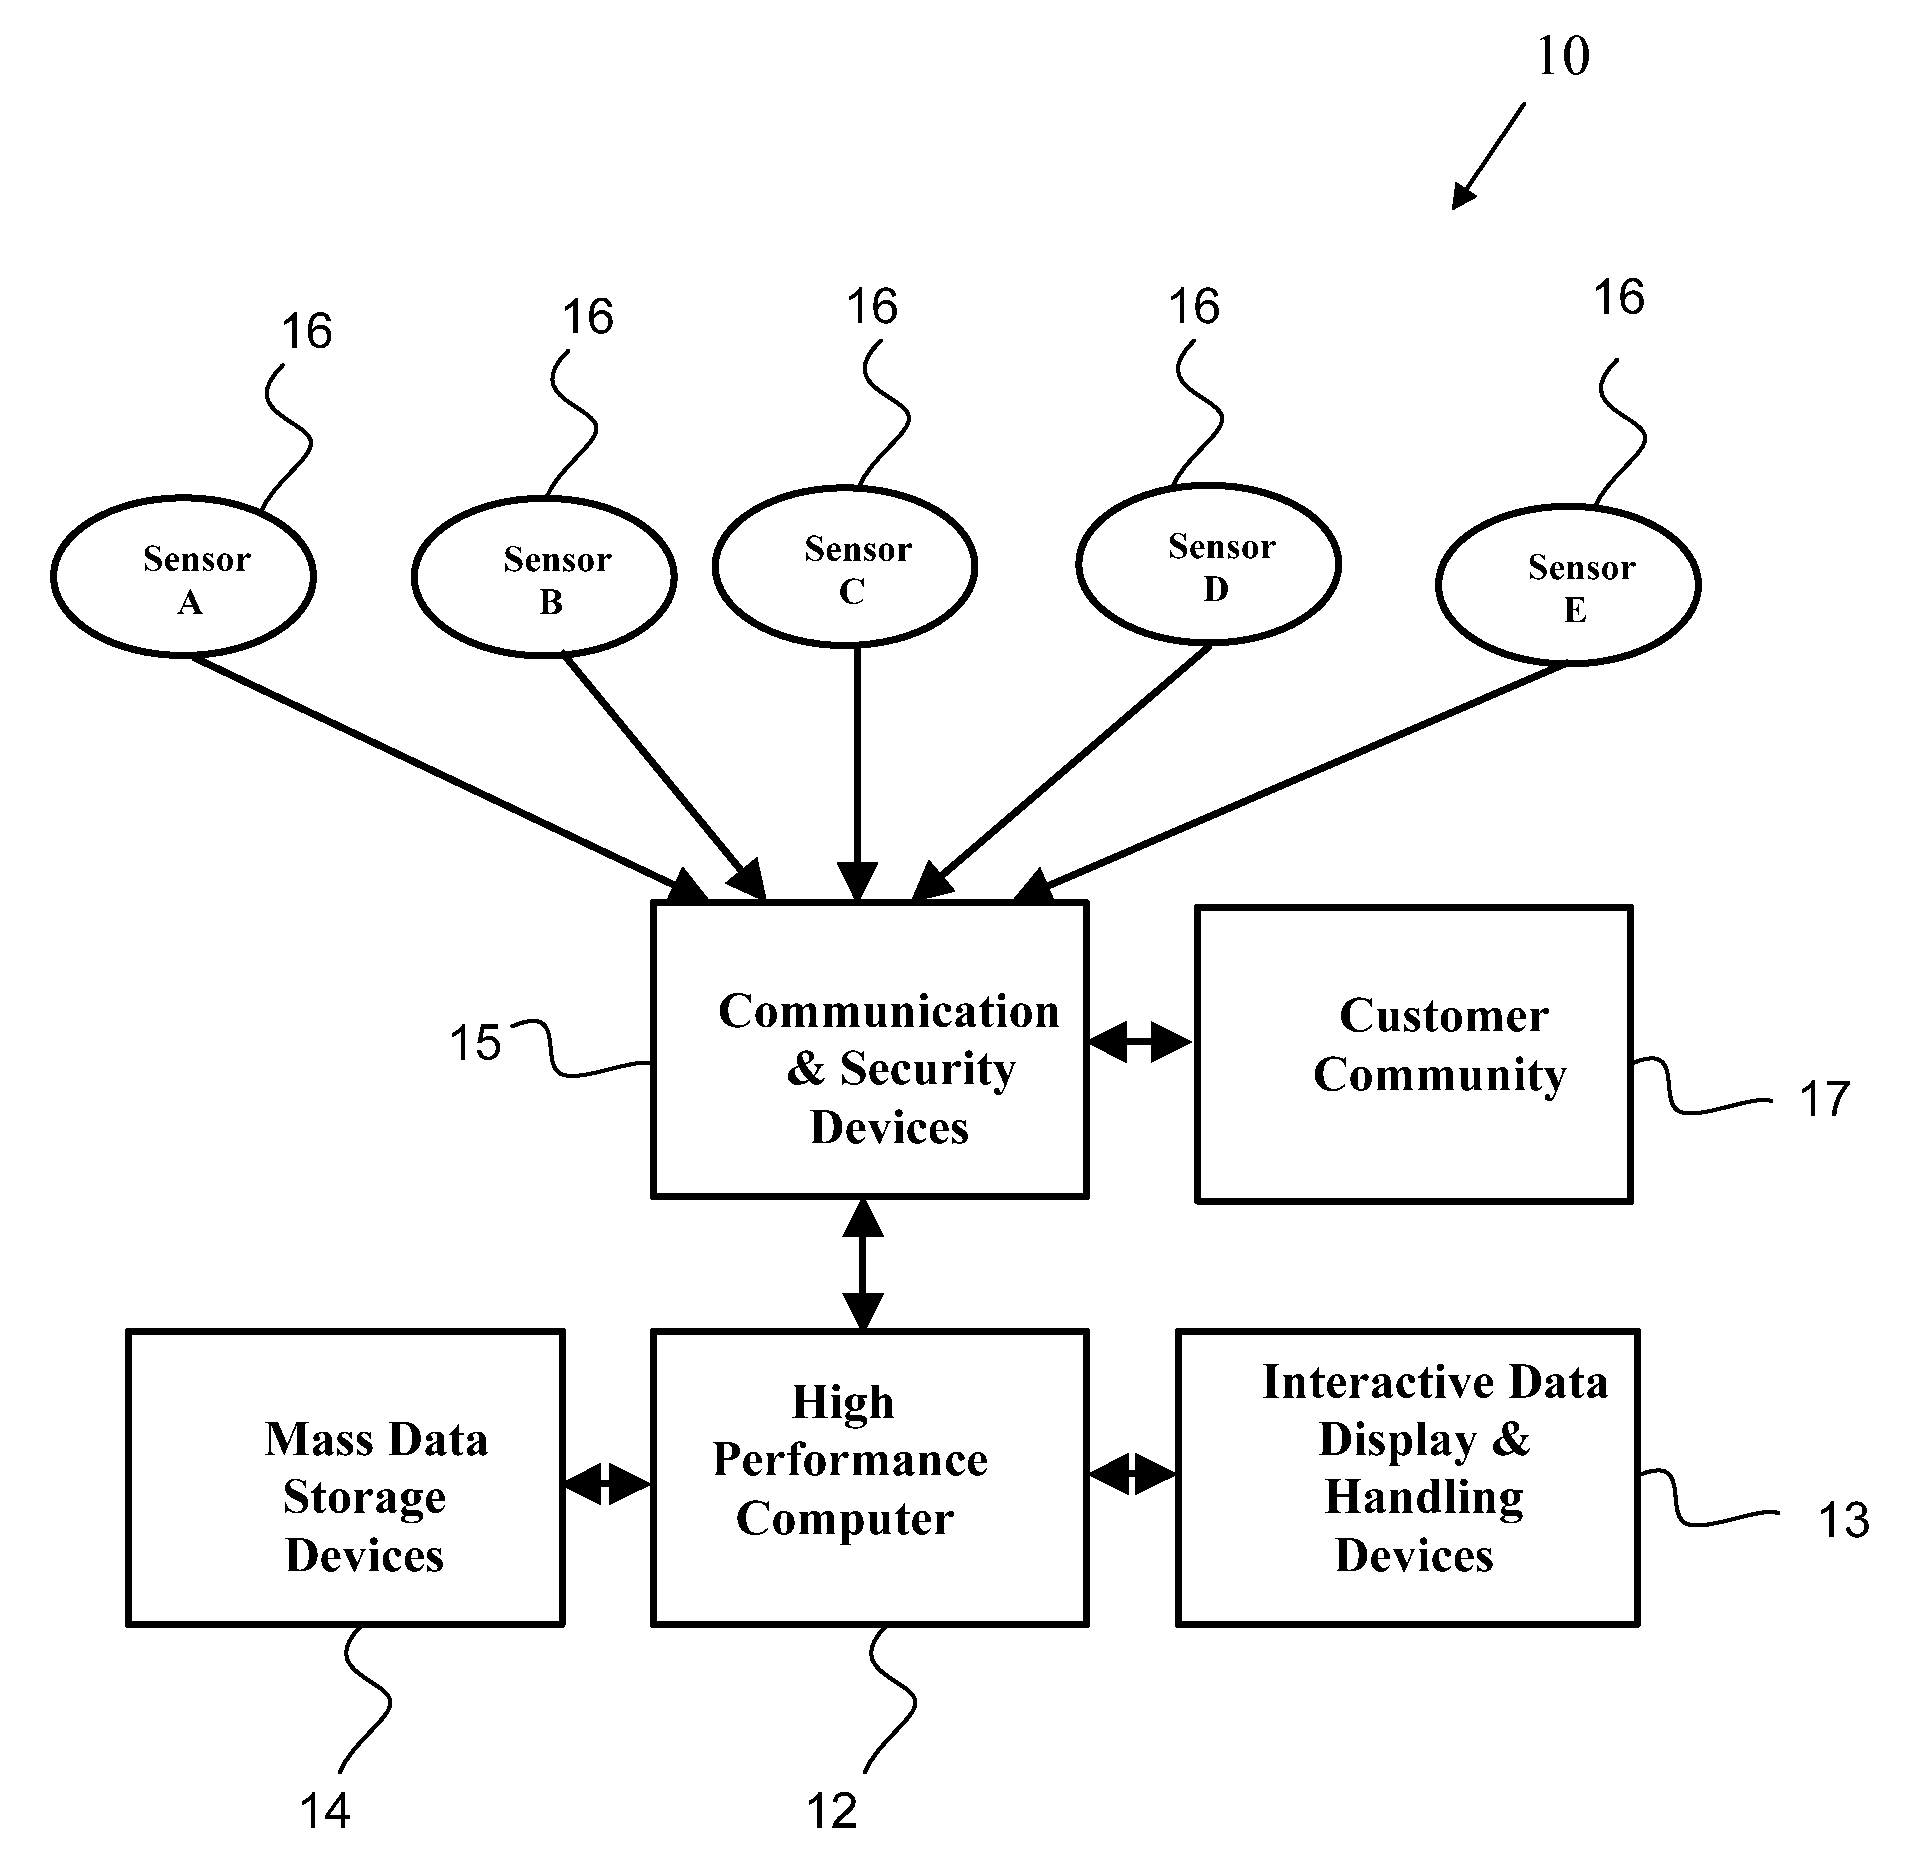 Equation of linked multiple source measurements to a uniquely identified object